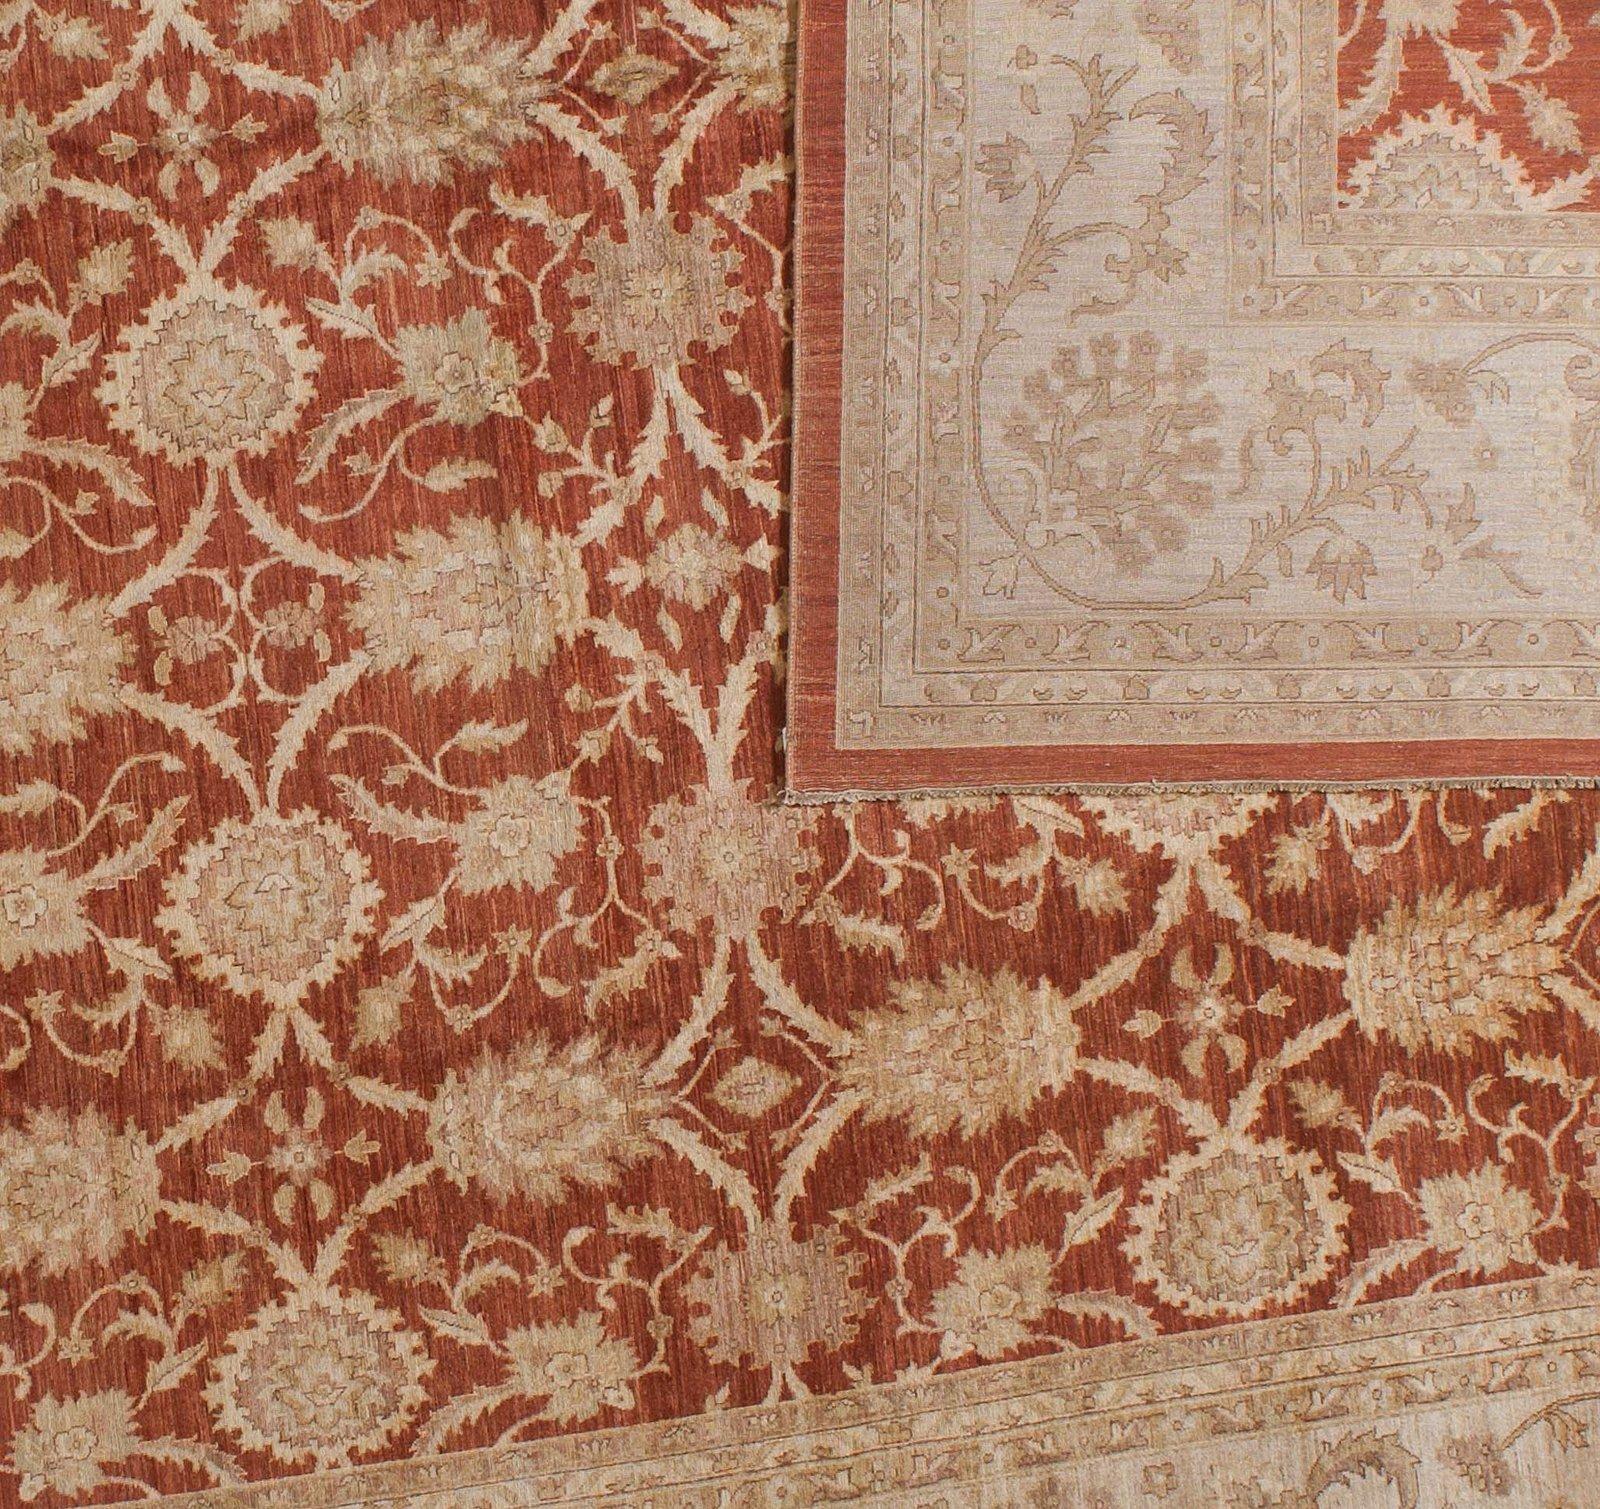 The bold red core of this traditional Pakistani design emphasizes the unusual oblong shape while the beige border adds the look of a fine brocade ribbon to define the edges. The net effect is an elegant and stylish rug that can serve as a